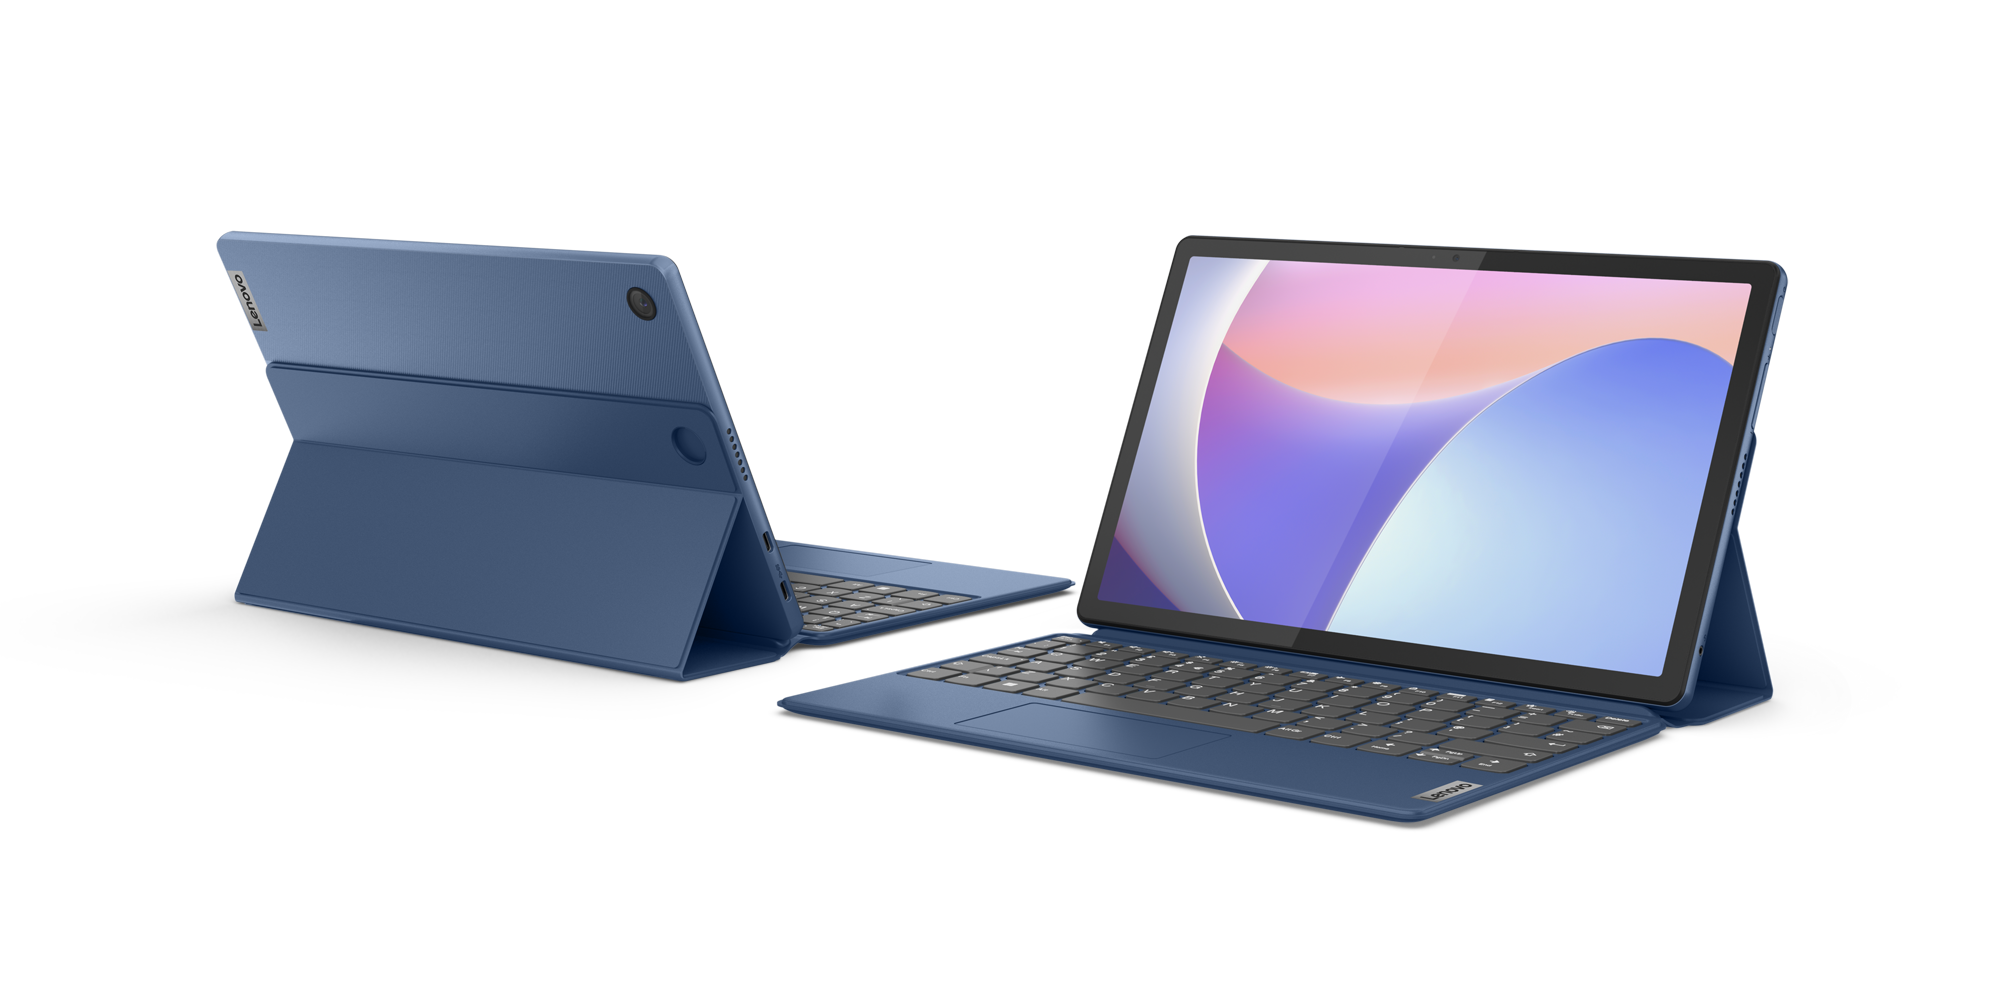 Lenovo IdeaPad Duet 3i (11-inch, 8) launches with improved display and  camera specs - NotebookCheck.net News